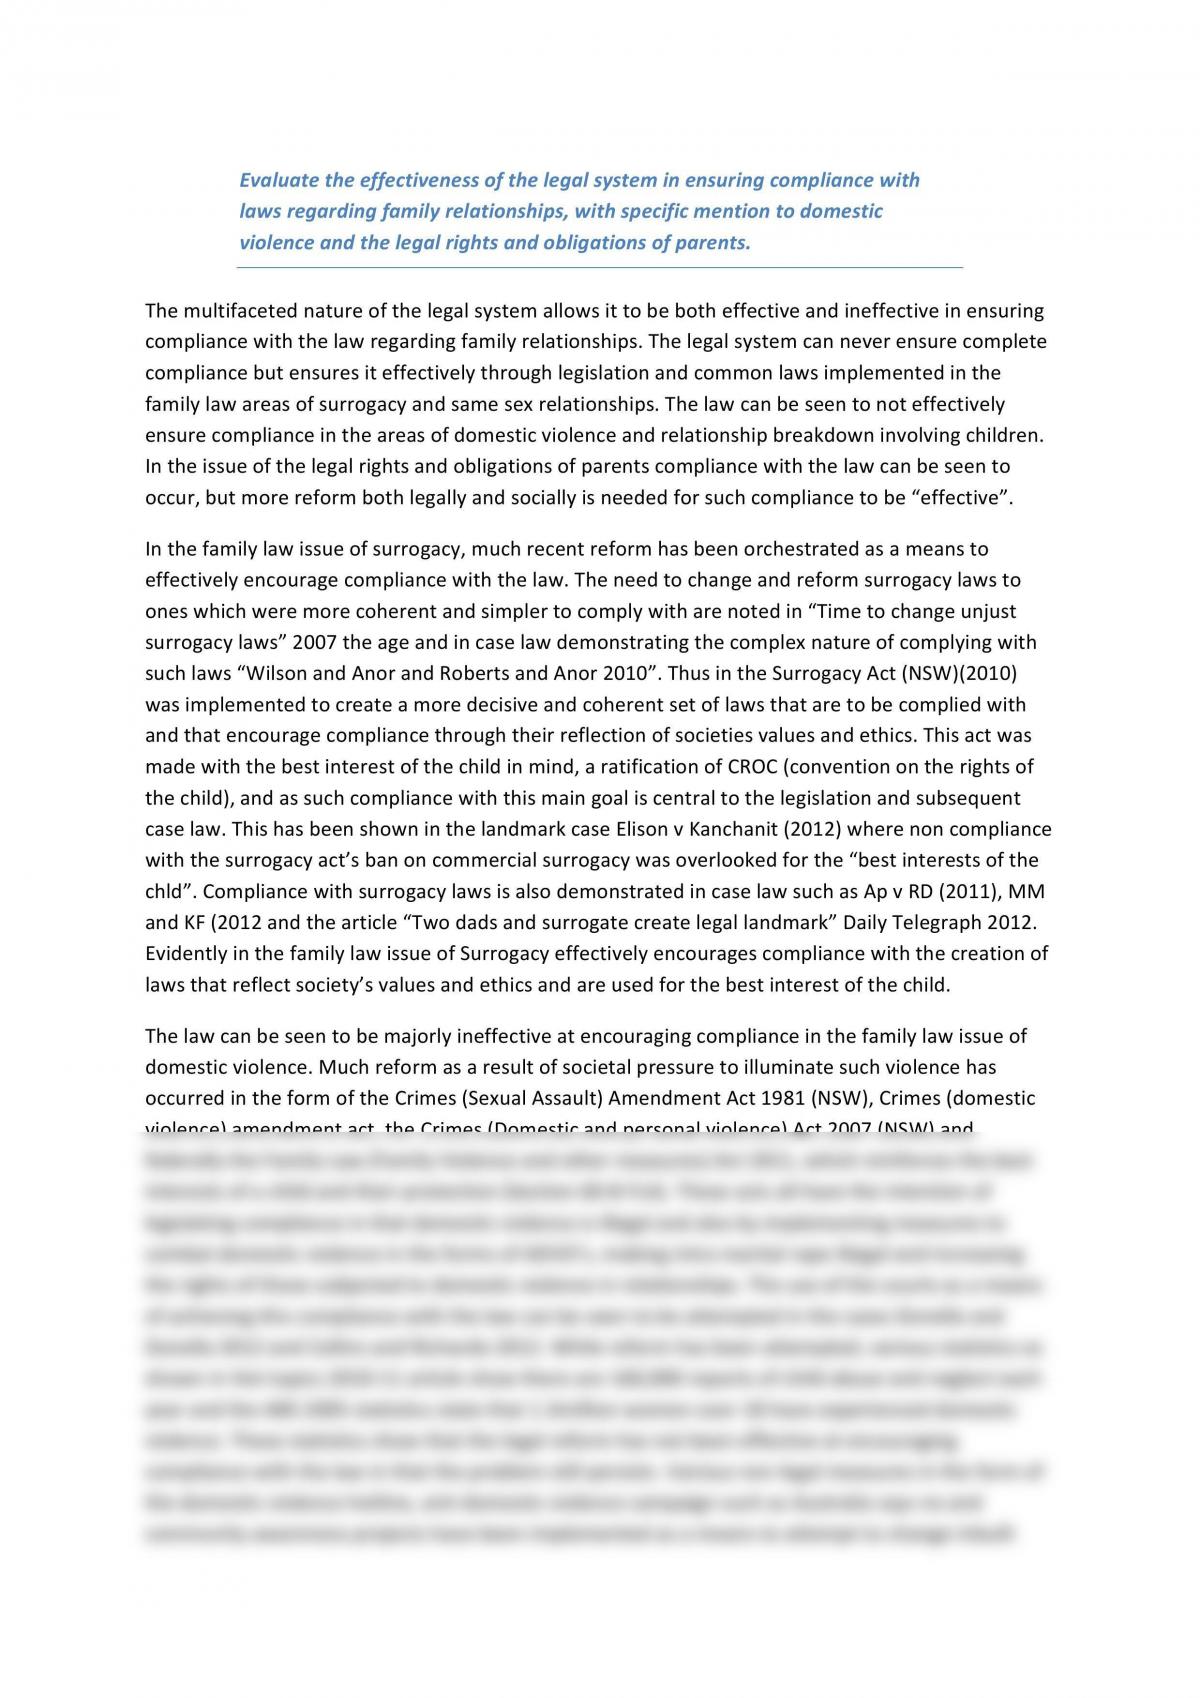 Family Law band 6 essay - Page 1